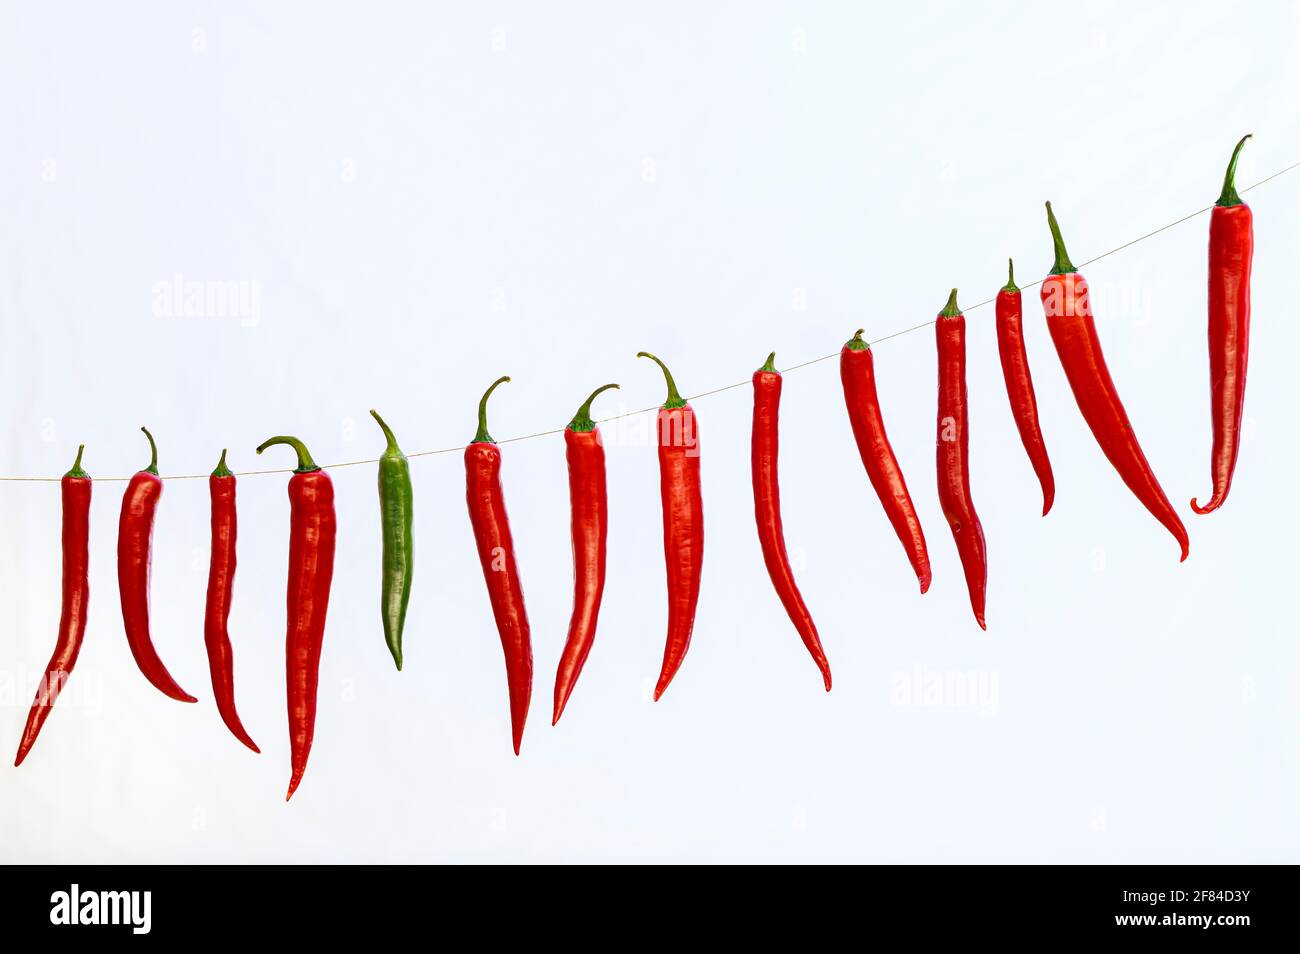 Red and green peppers on string Stock Photo